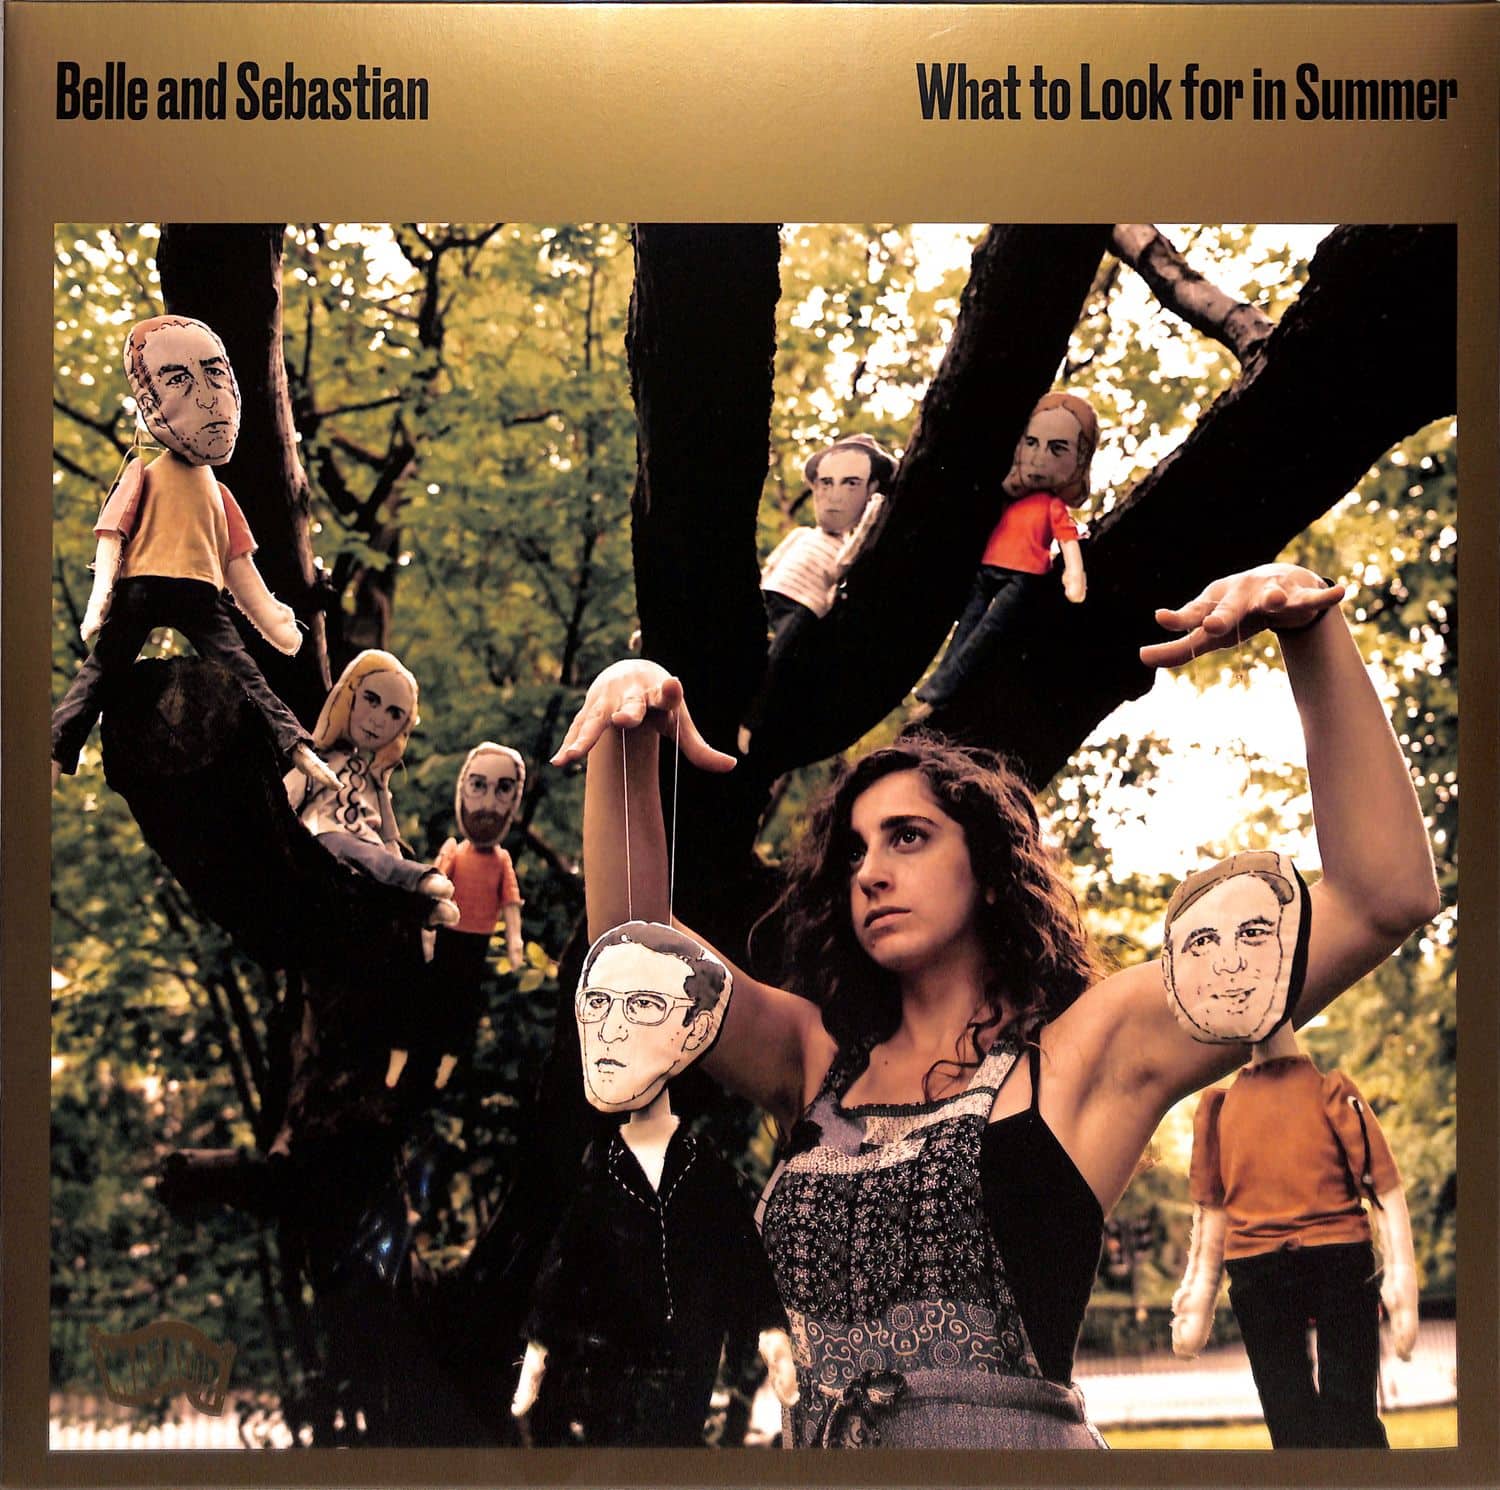 Belle And Sebastian - WHAT TO LOOK FOR IN SUMMER 